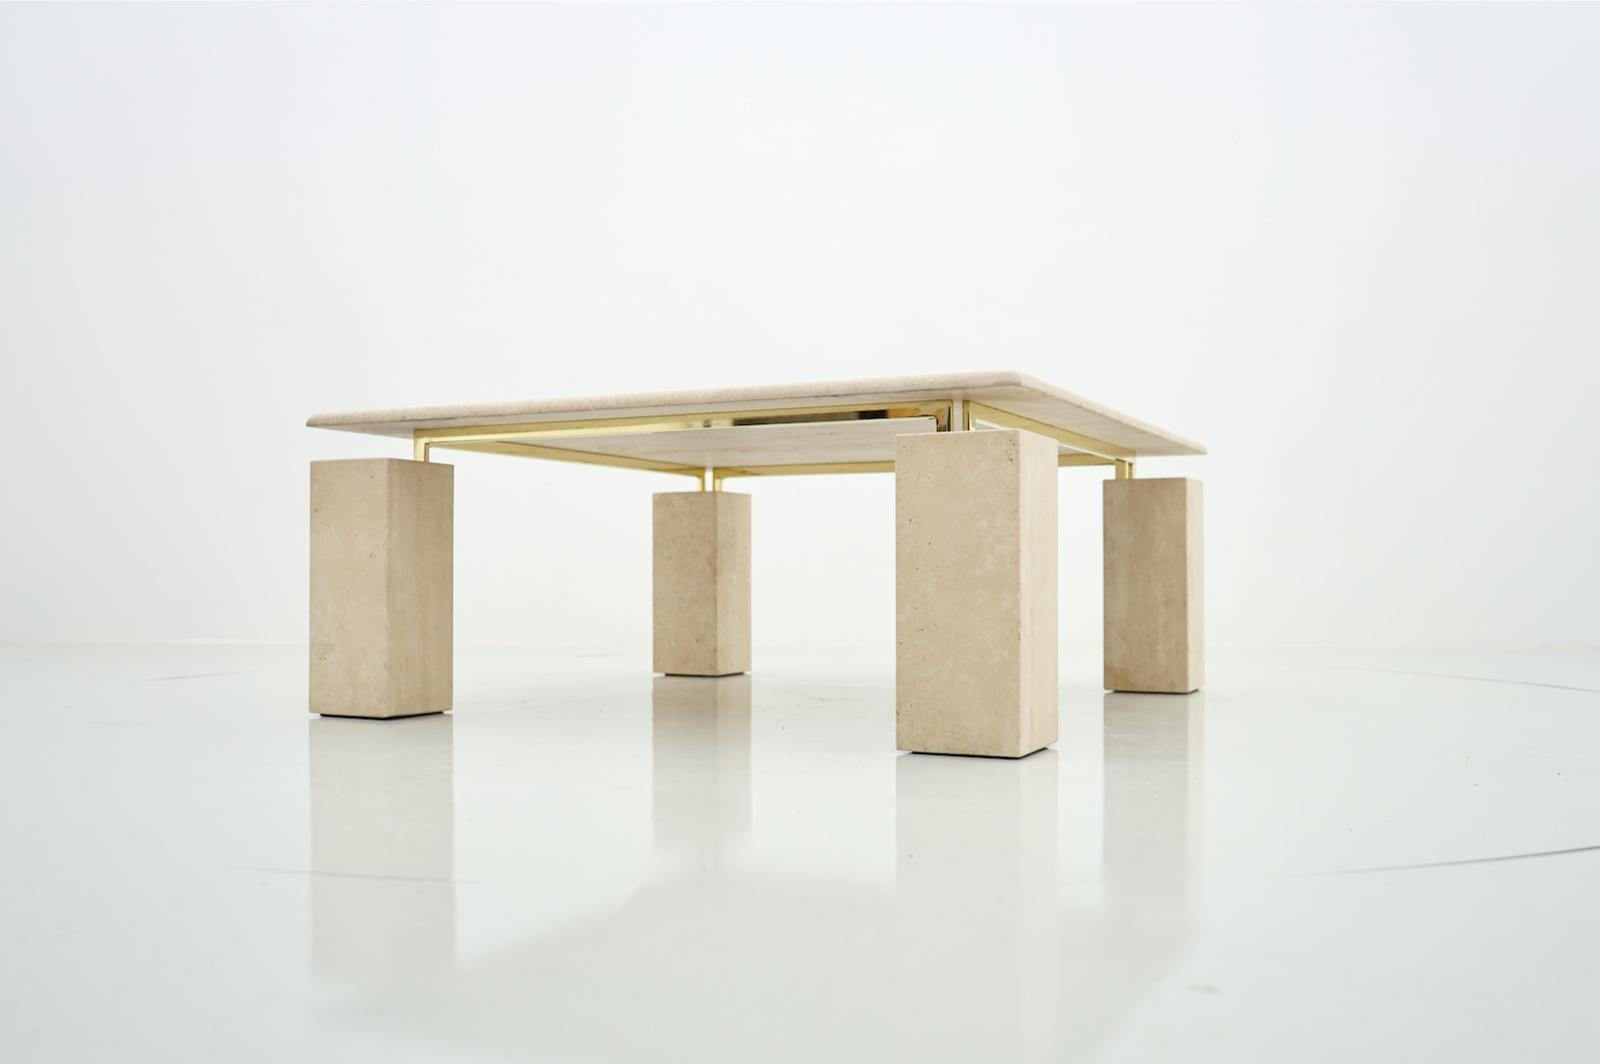 Square Coffee Table in Italian Travertine with Floating Table Top, 1970s For Sale 1